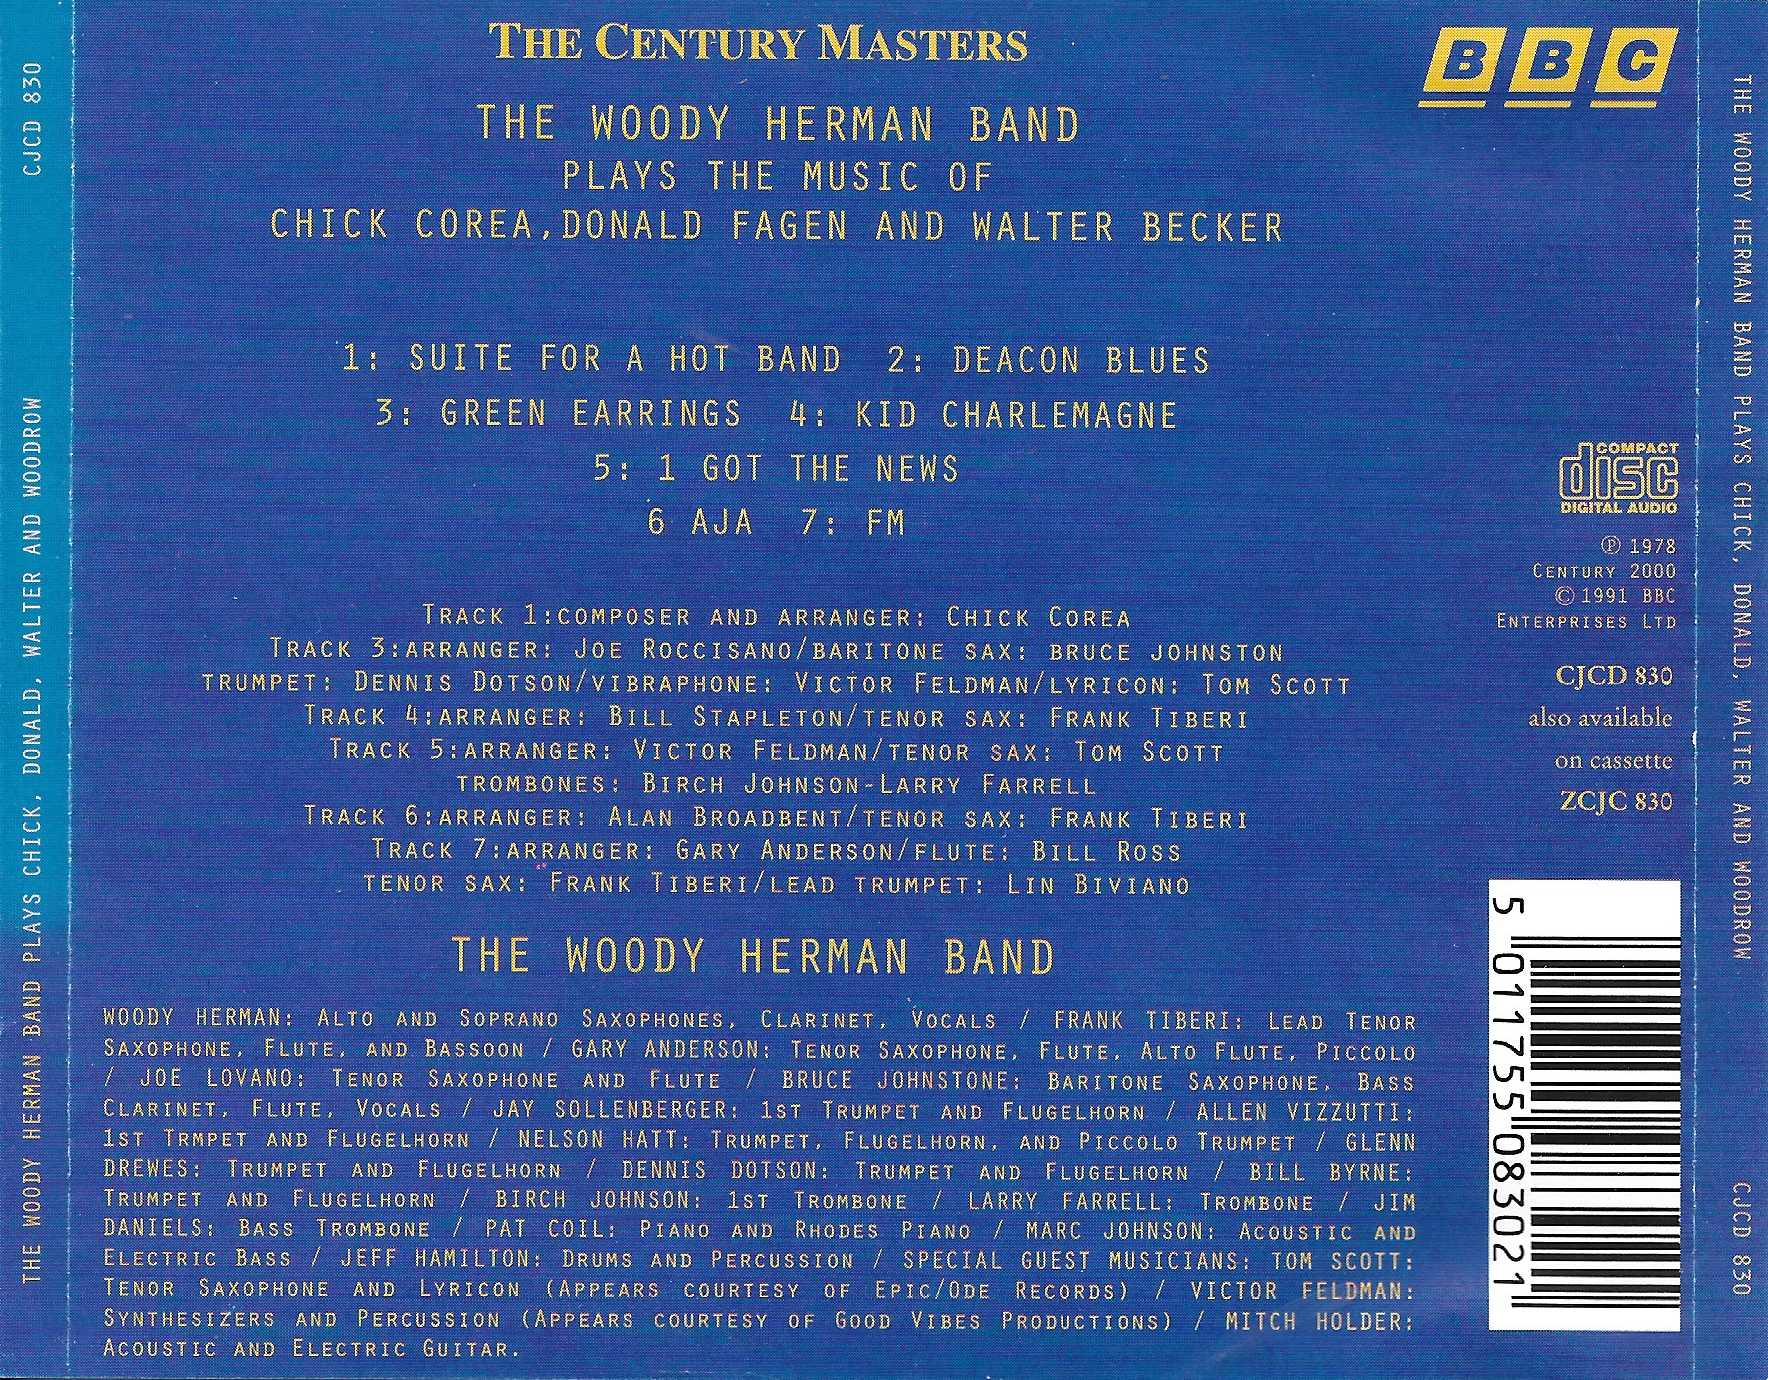 Picture of CJCD 830 The Century Catalogue - The Woody Herman Band plays the music of Chick Corea, Donald Fagen and Walter Becker by artist Chich Corea / Walter Becker / Donald Fagen / Woody Herman from the BBC records and Tapes library